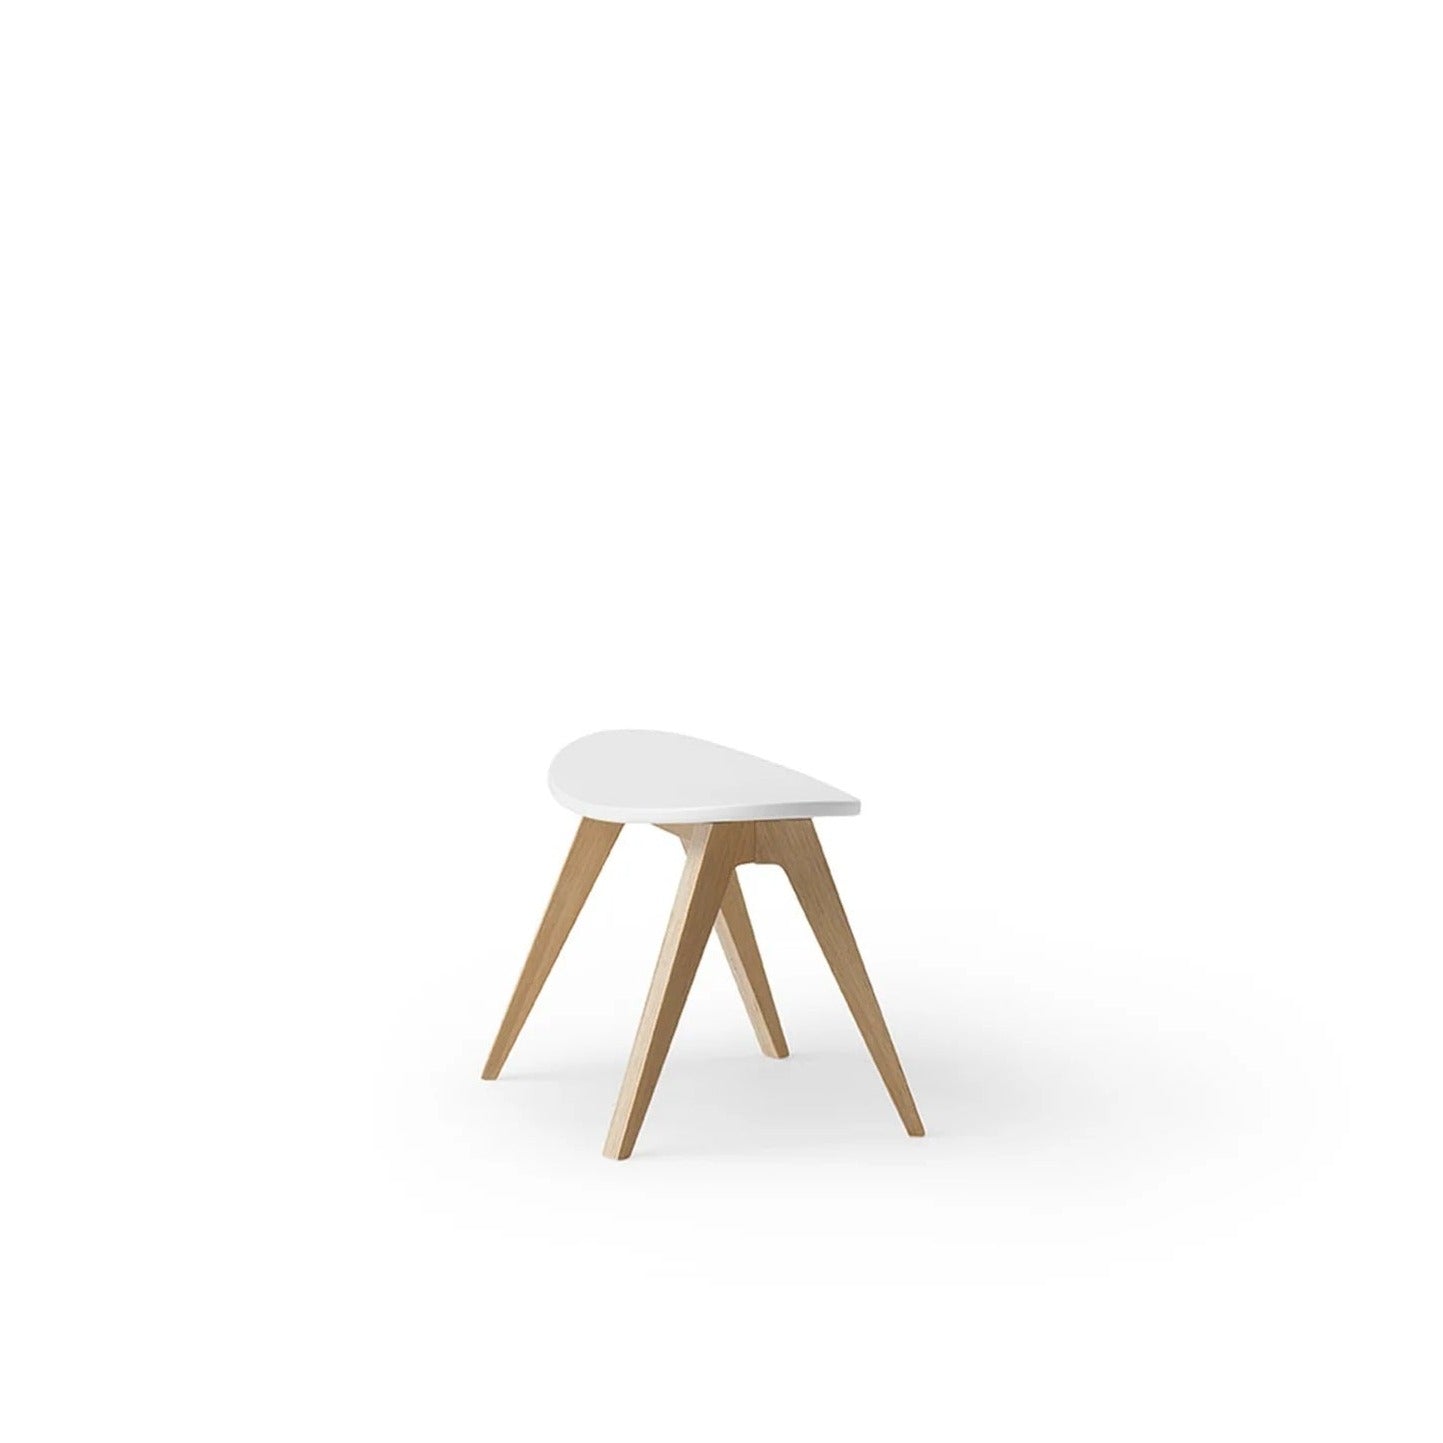 Oliver Furniture Wood PingPong Table & Chairs - White/Oak